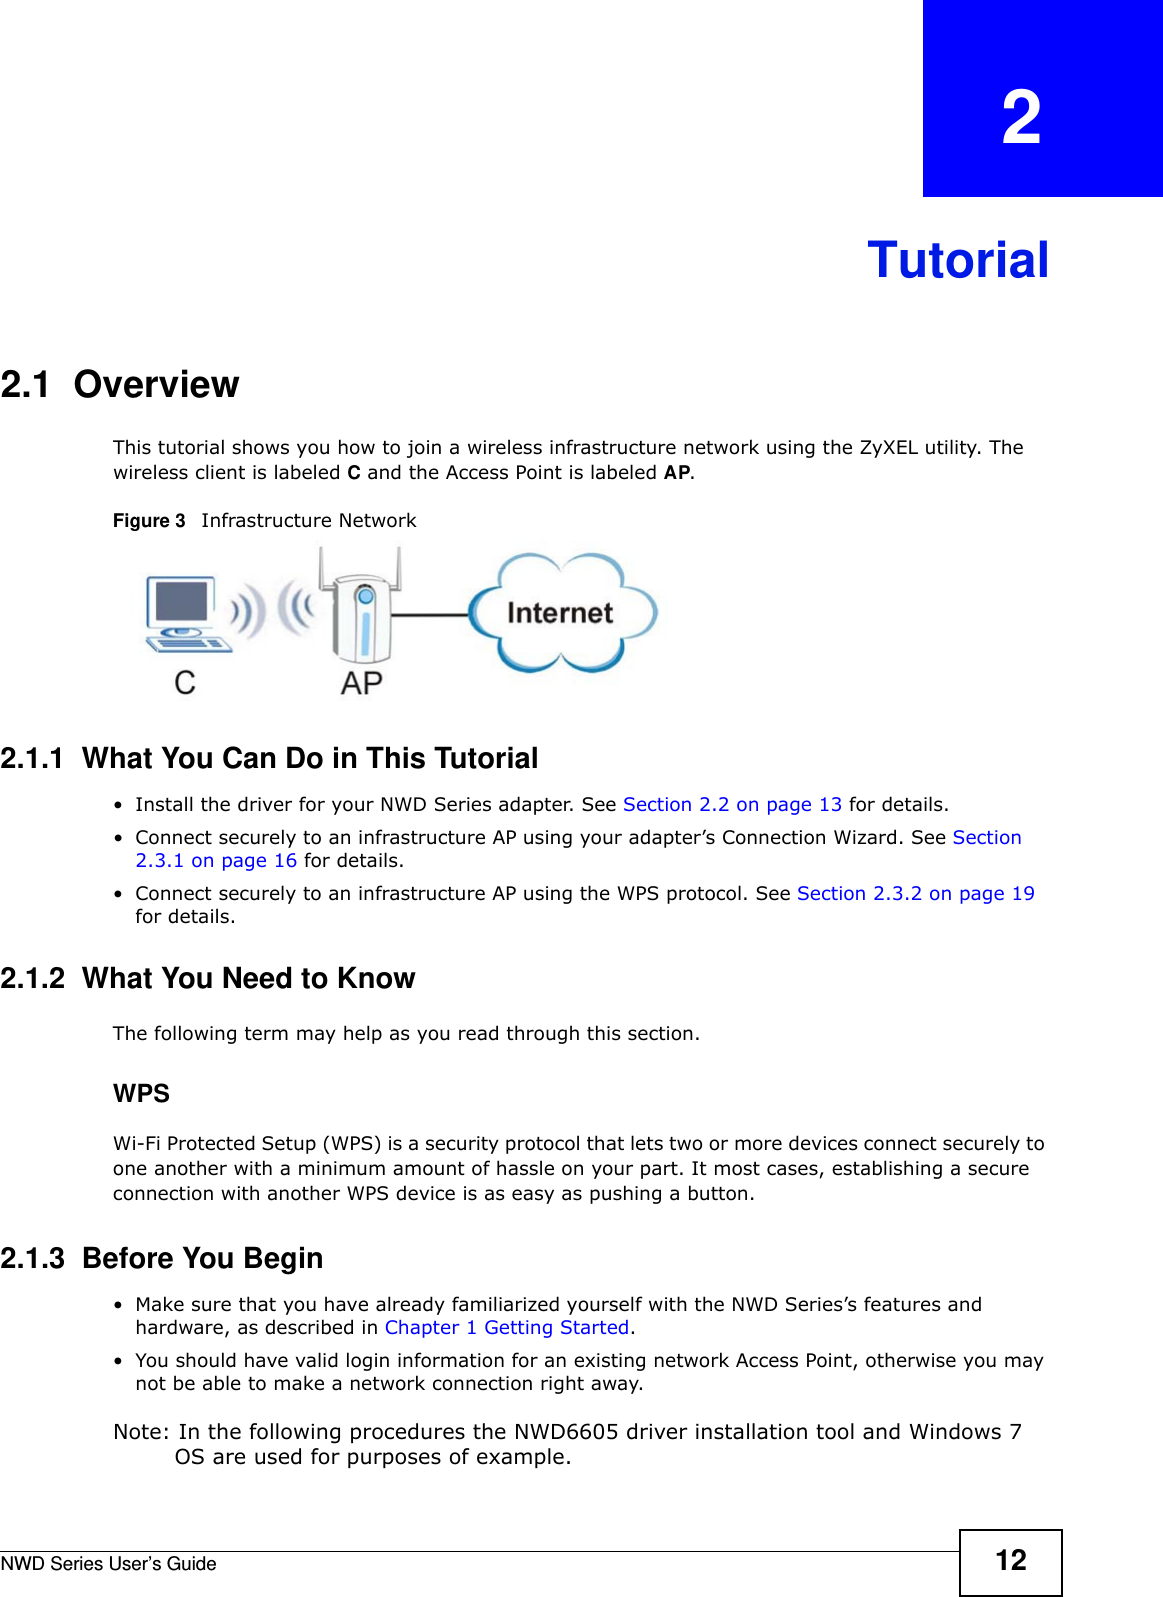 NWD Series User’s Guide 12CHAPTER   2Tutorial2.1  OverviewThis tutorial shows you how to join a wireless infrastructure network using the ZyXEL utility. The wireless client is labeled C and the Access Point is labeled AP.Figure 3   Infrastructure Network2.1.1  What You Can Do in This Tutorial• Install the driver for your NWD Series adapter. See Section 2.2 on page 13 for details.• Connect securely to an infrastructure AP using your adapter’s Connection Wizard. See Section 2.3.1 on page 16 for details.• Connect securely to an infrastructure AP using the WPS protocol. See Section 2.3.2 on page 19 for details.2.1.2  What You Need to KnowThe following term may help as you read through this section.WPSWi-Fi Protected Setup (WPS) is a security protocol that lets two or more devices connect securely to one another with a minimum amount of hassle on your part. It most cases, establishing a secure connection with another WPS device is as easy as pushing a button.2.1.3  Before You Begin• Make sure that you have already familiarized yourself with the NWD Series’s features and hardware, as described in Chapter 1 Getting Started.• You should have valid login information for an existing network Access Point, otherwise you may not be able to make a network connection right away.Note: In the following procedures the NWD6605 driver installation tool and Windows 7 OS are used for purposes of example.